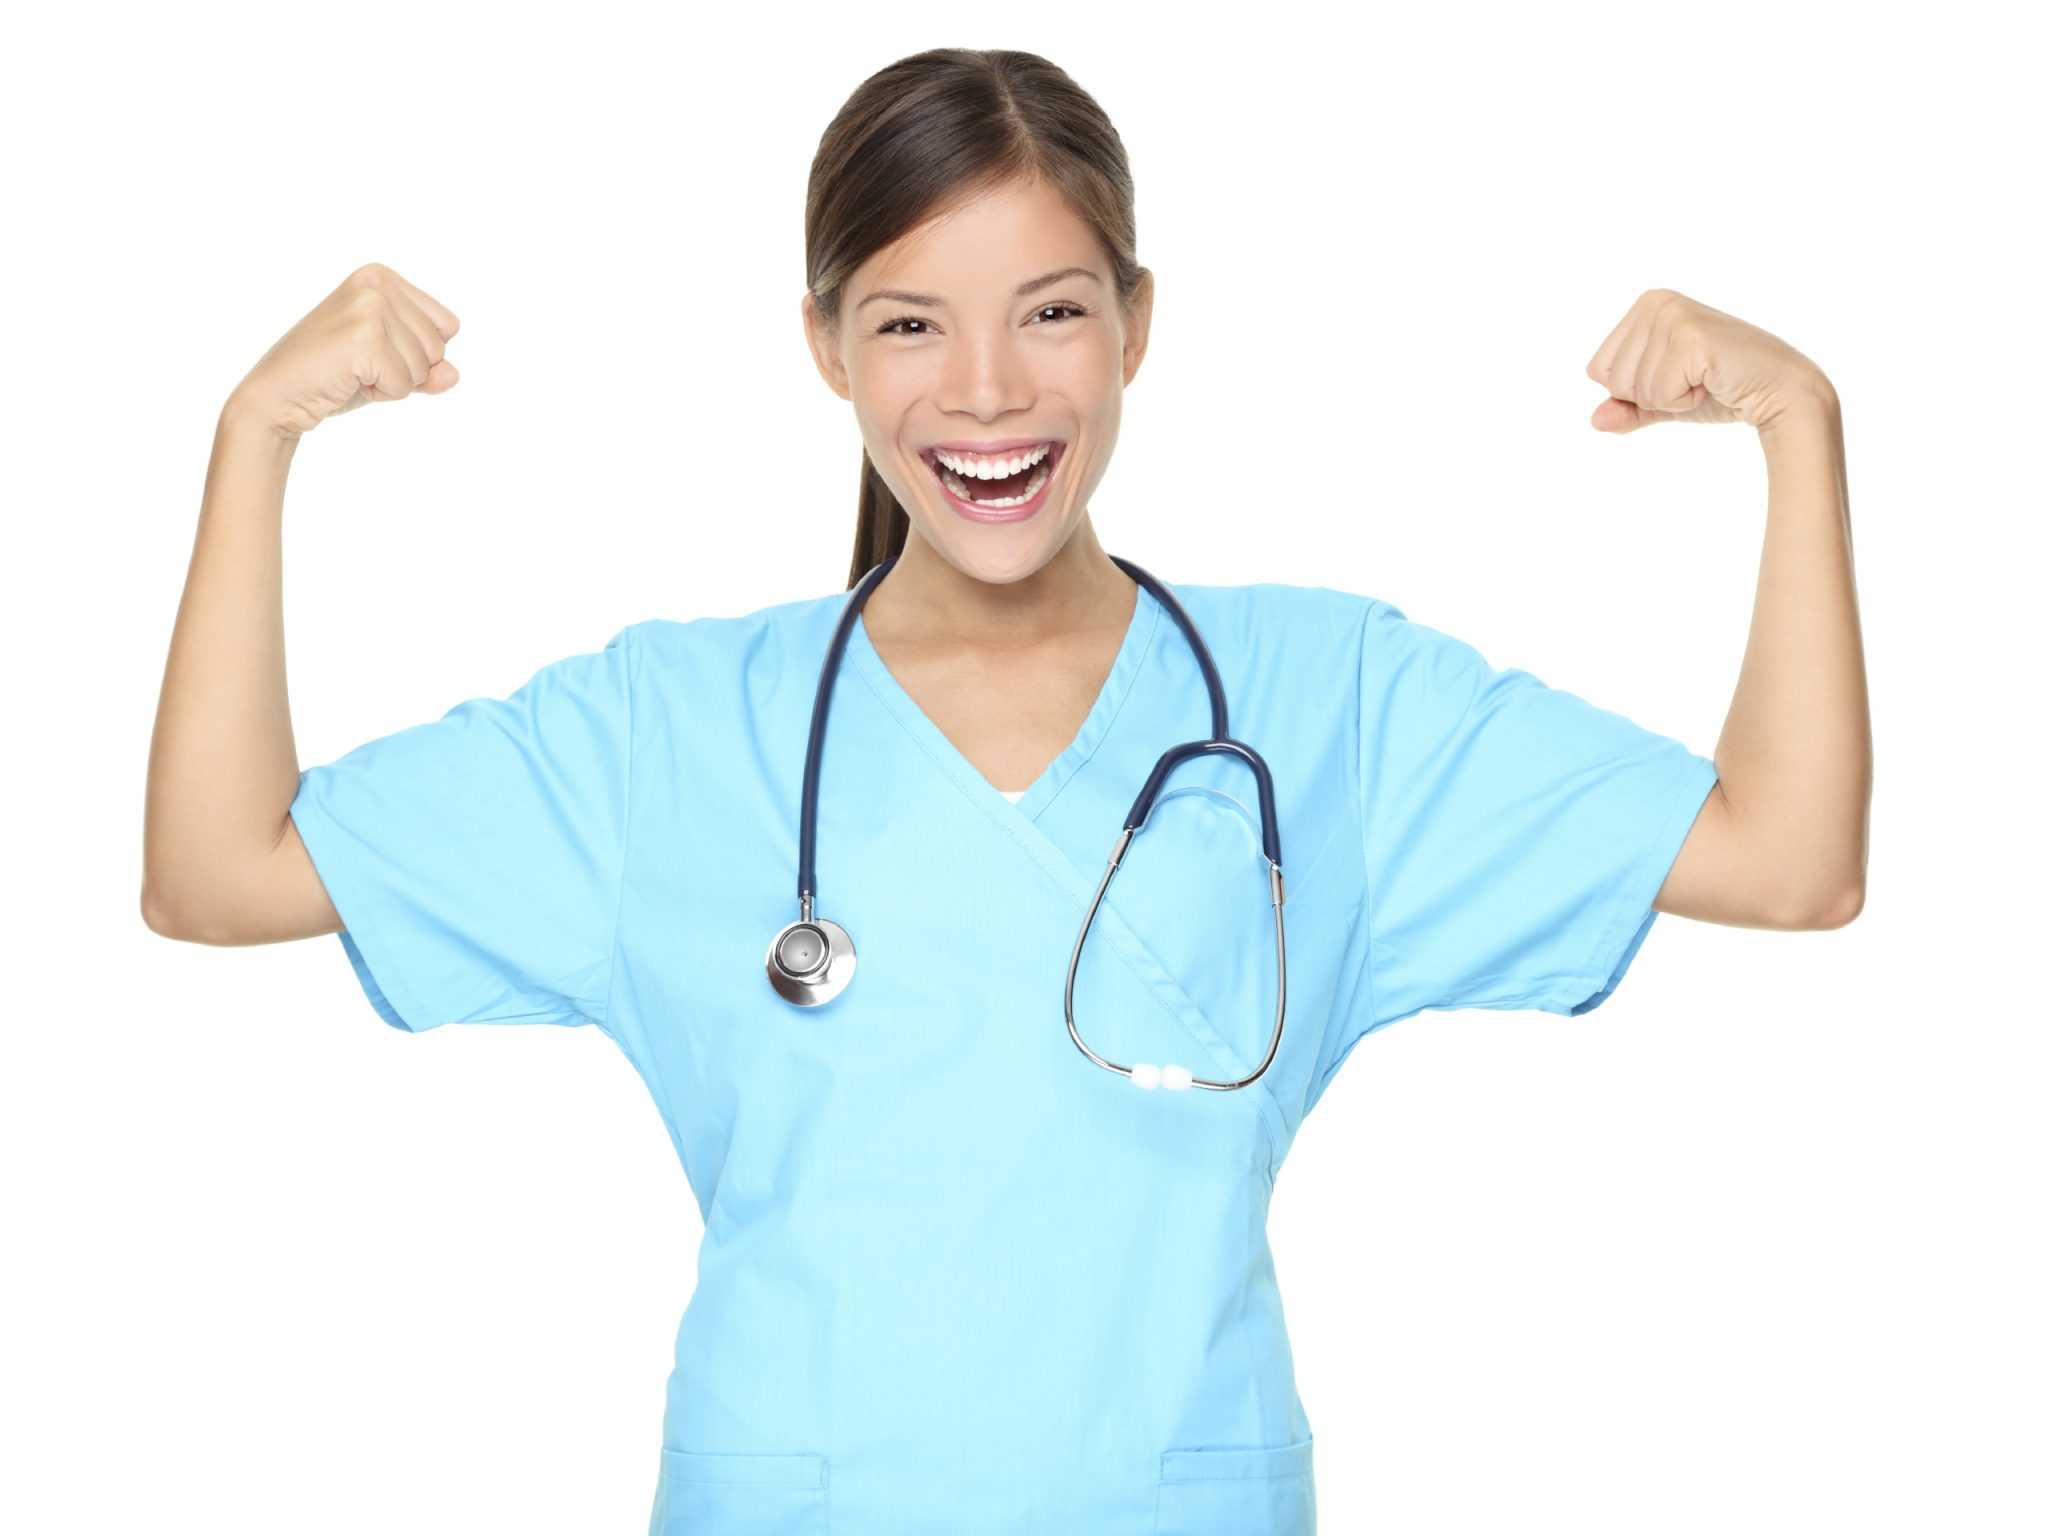 4 Types of Nurses for Contemporary Healthcare